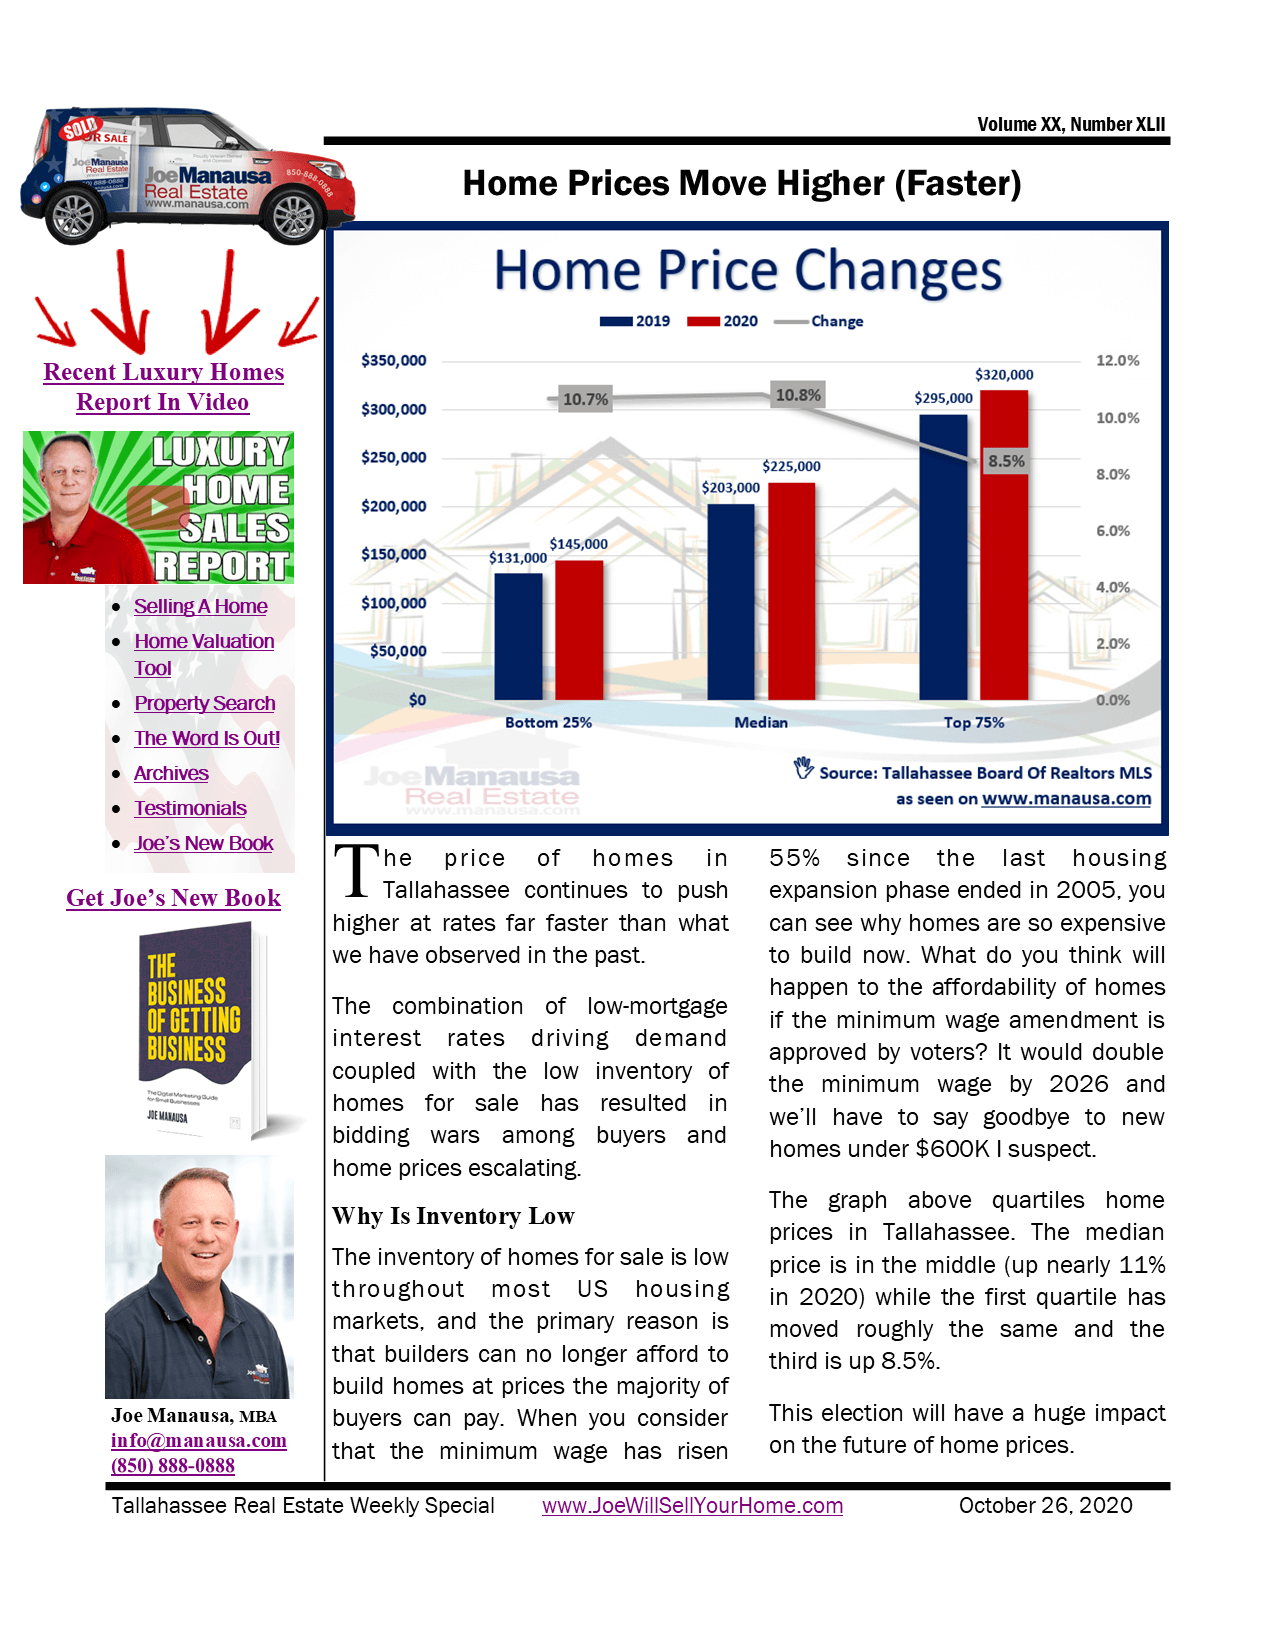 Home Prices Move Higher (Faster)